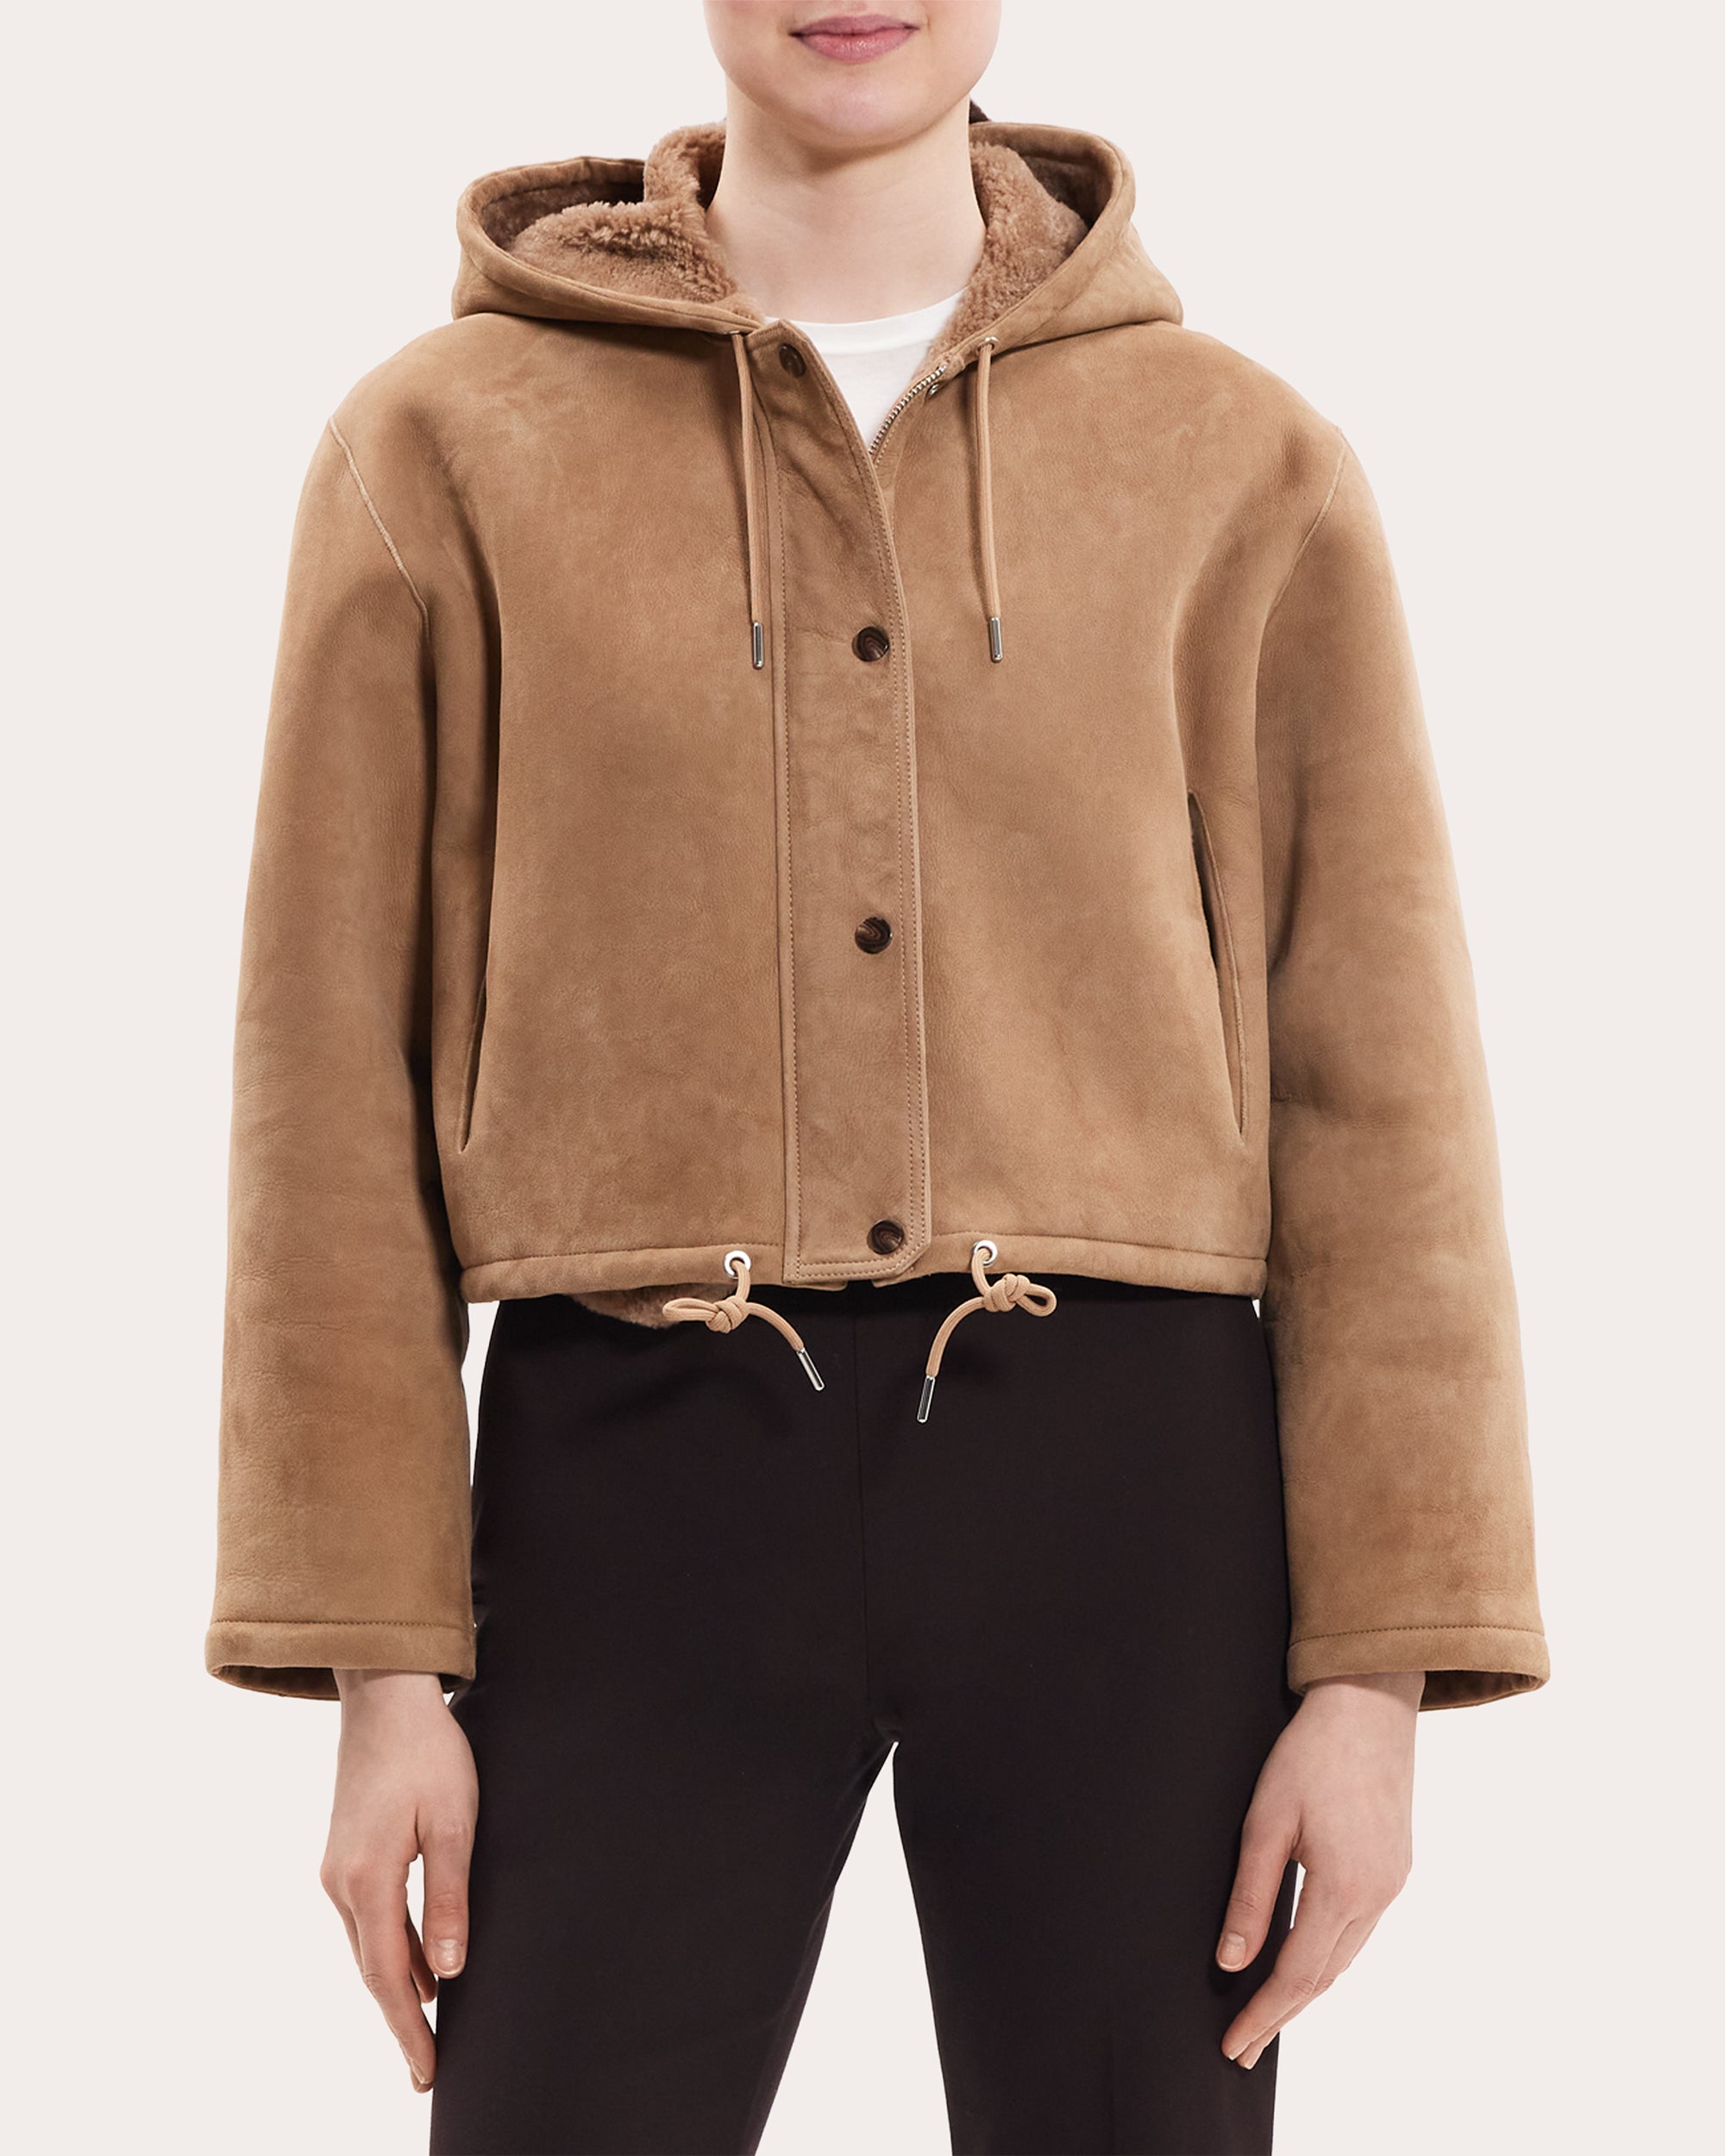 THEORY WOMEN'S CROPPED SHEARLING PARKA